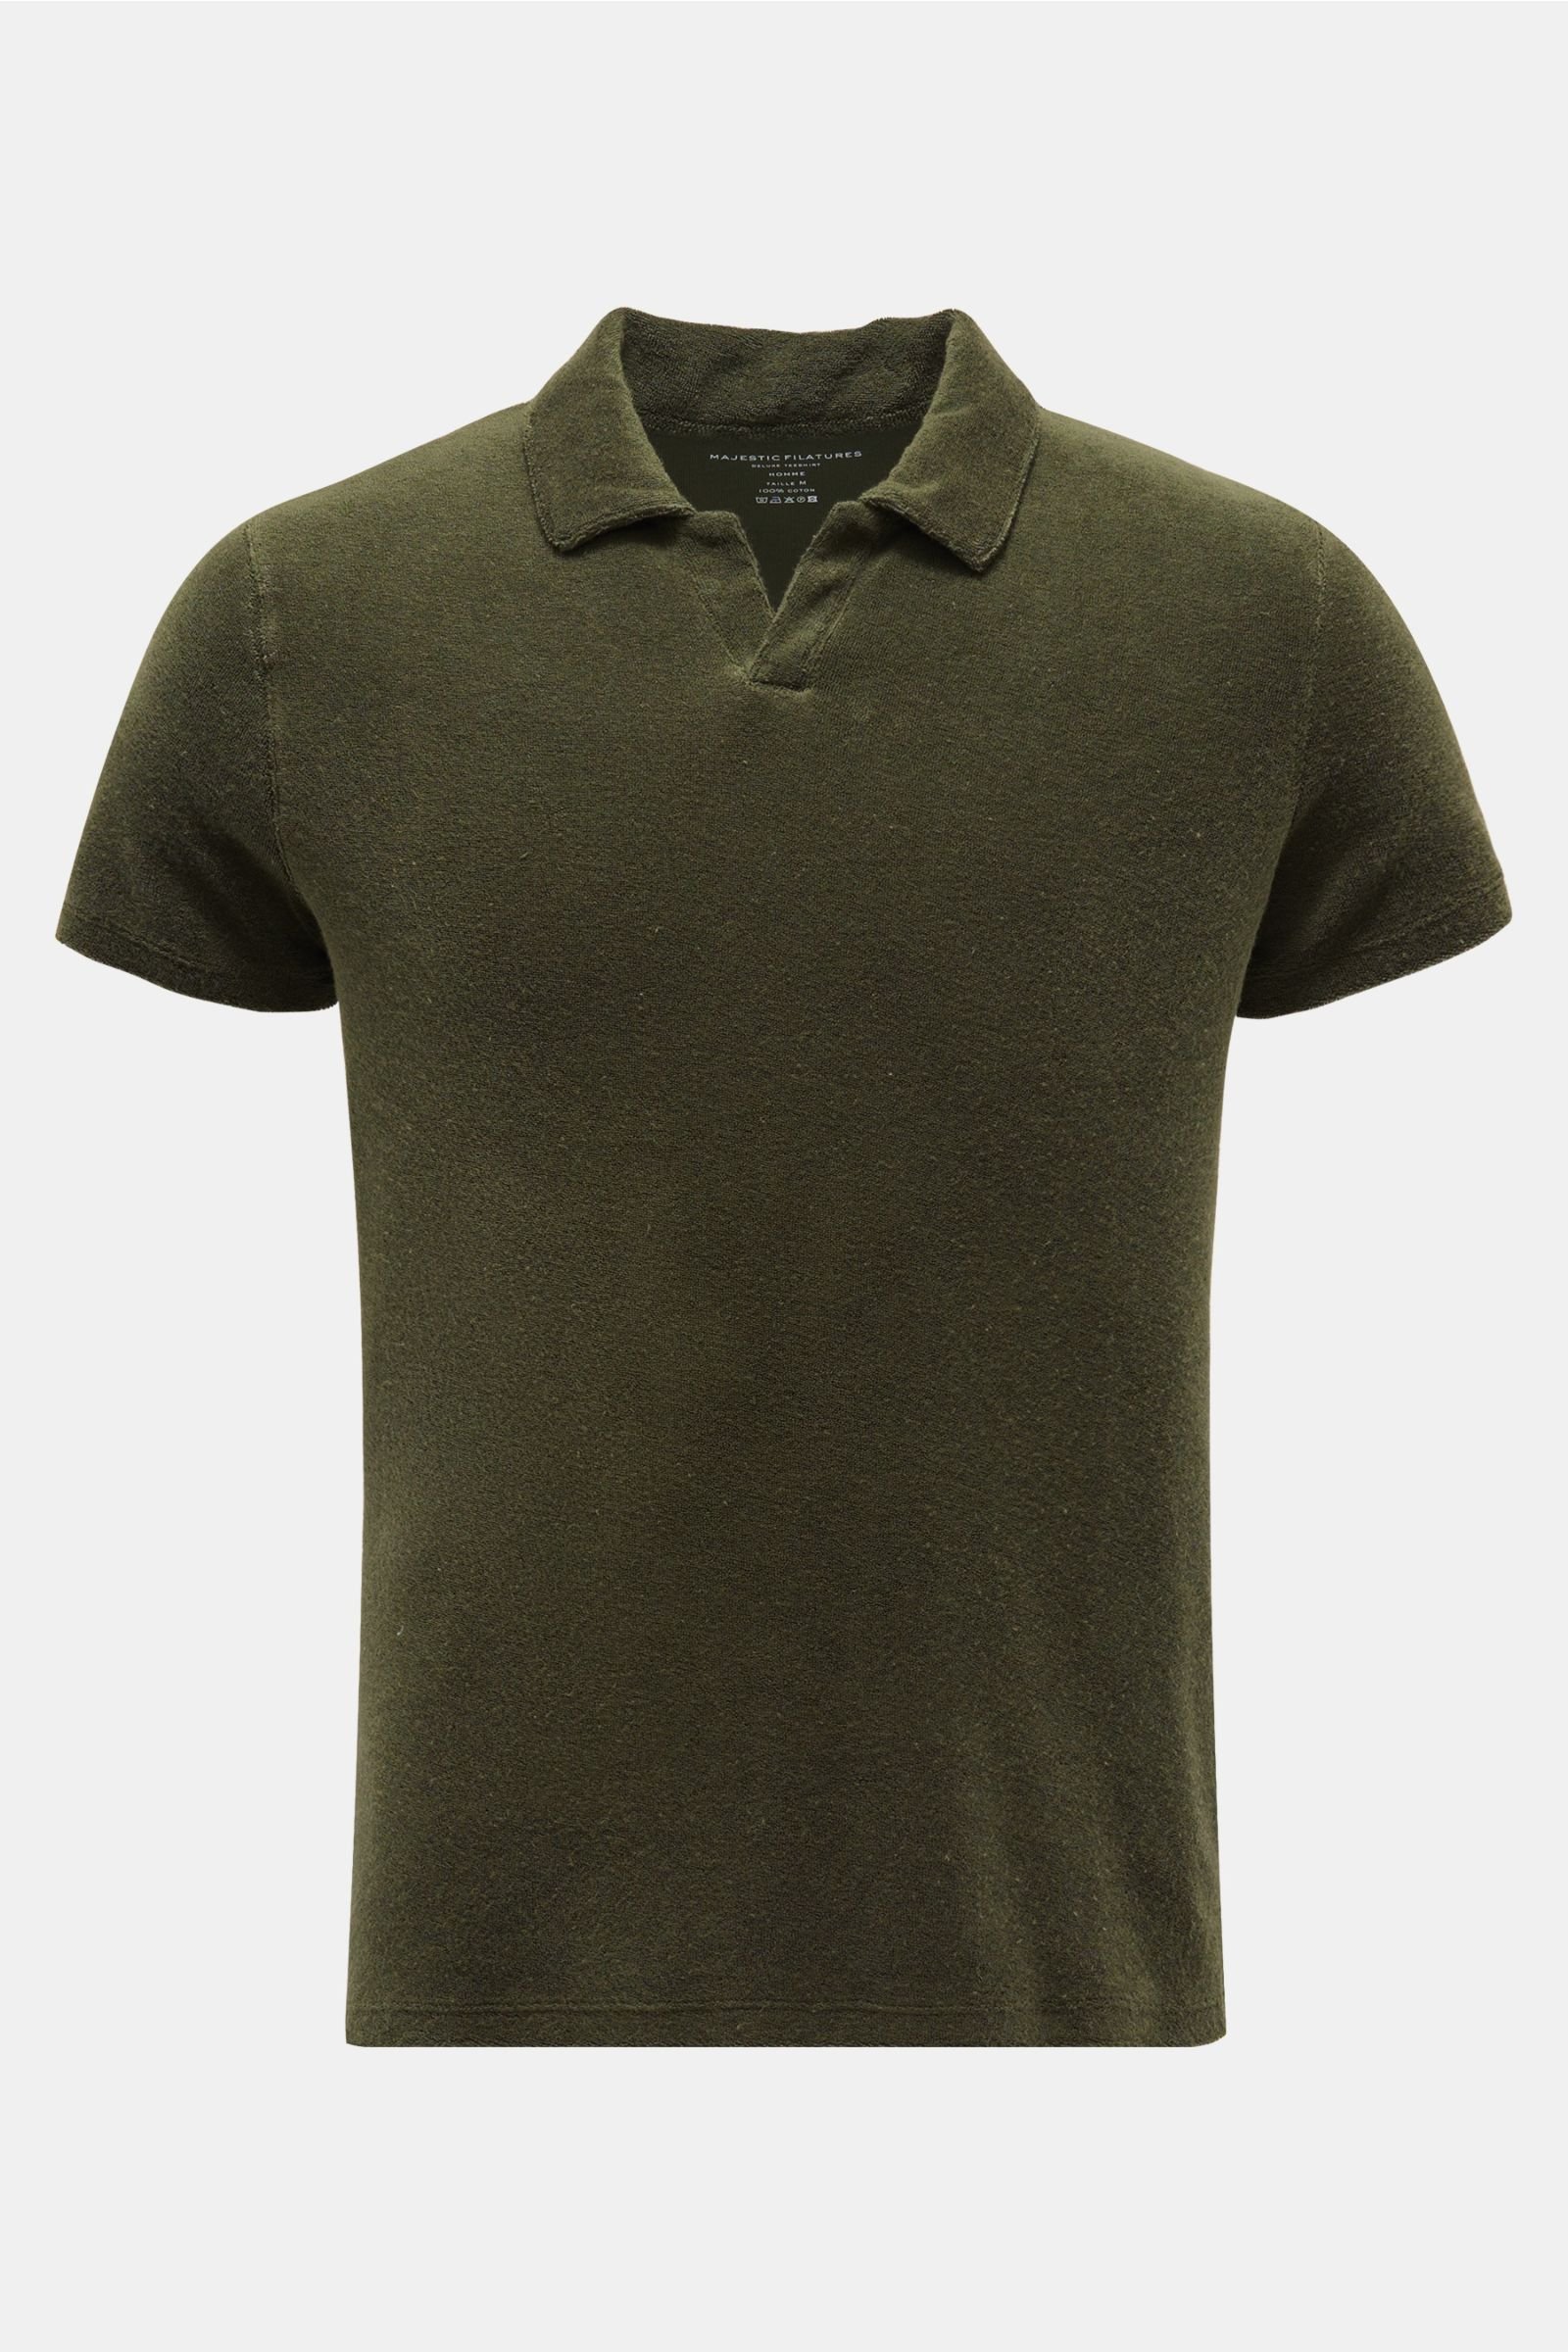 Terry polo shirt olive